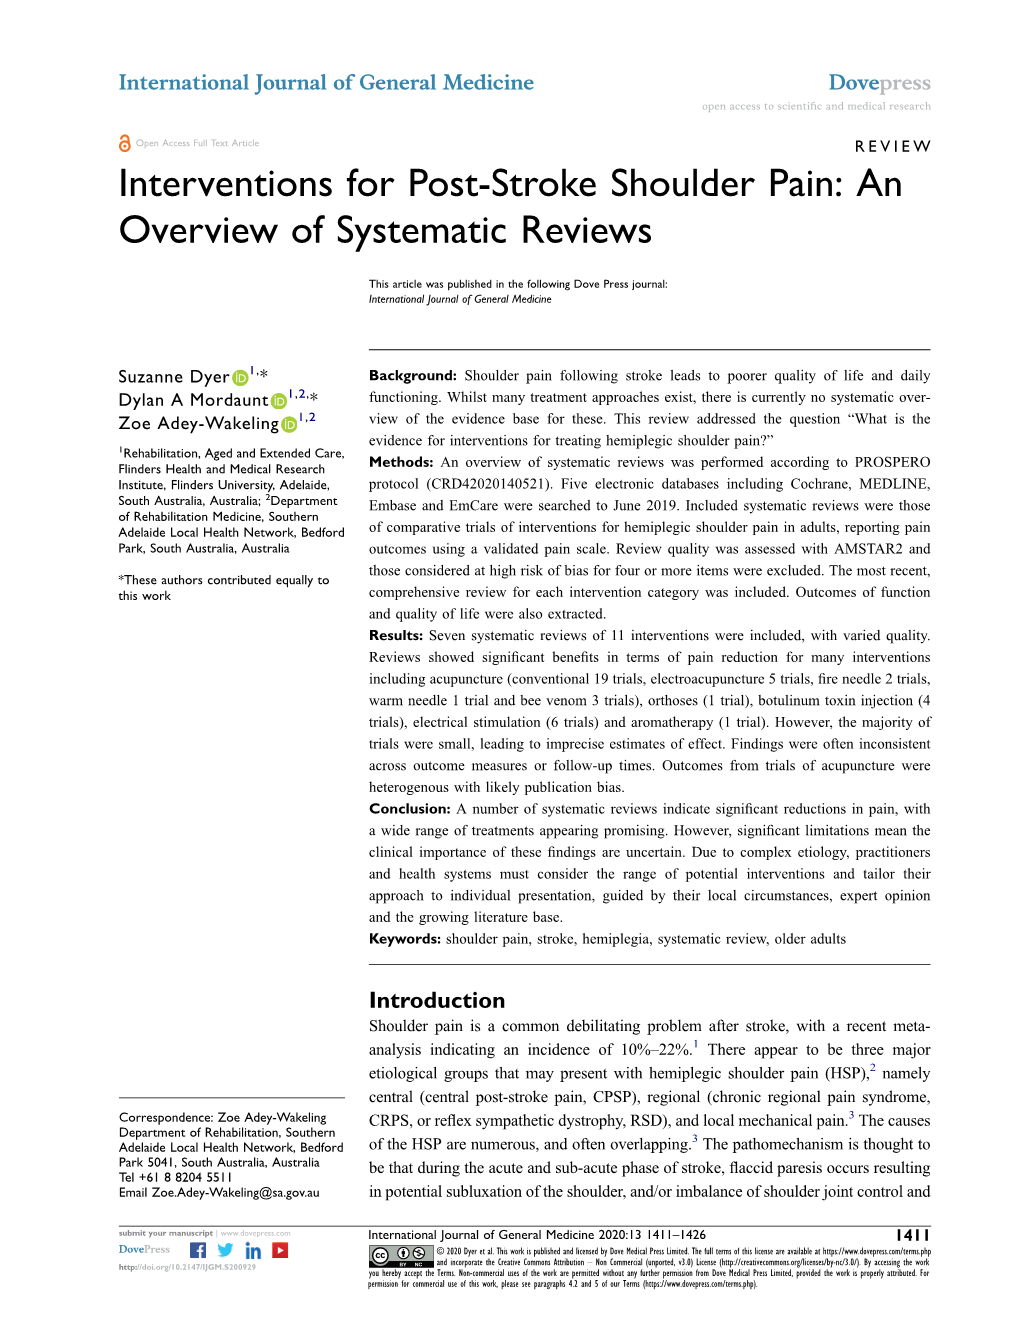 Interventions for Post-Stroke Shoulder Pain: an Overview of Systematic Reviews